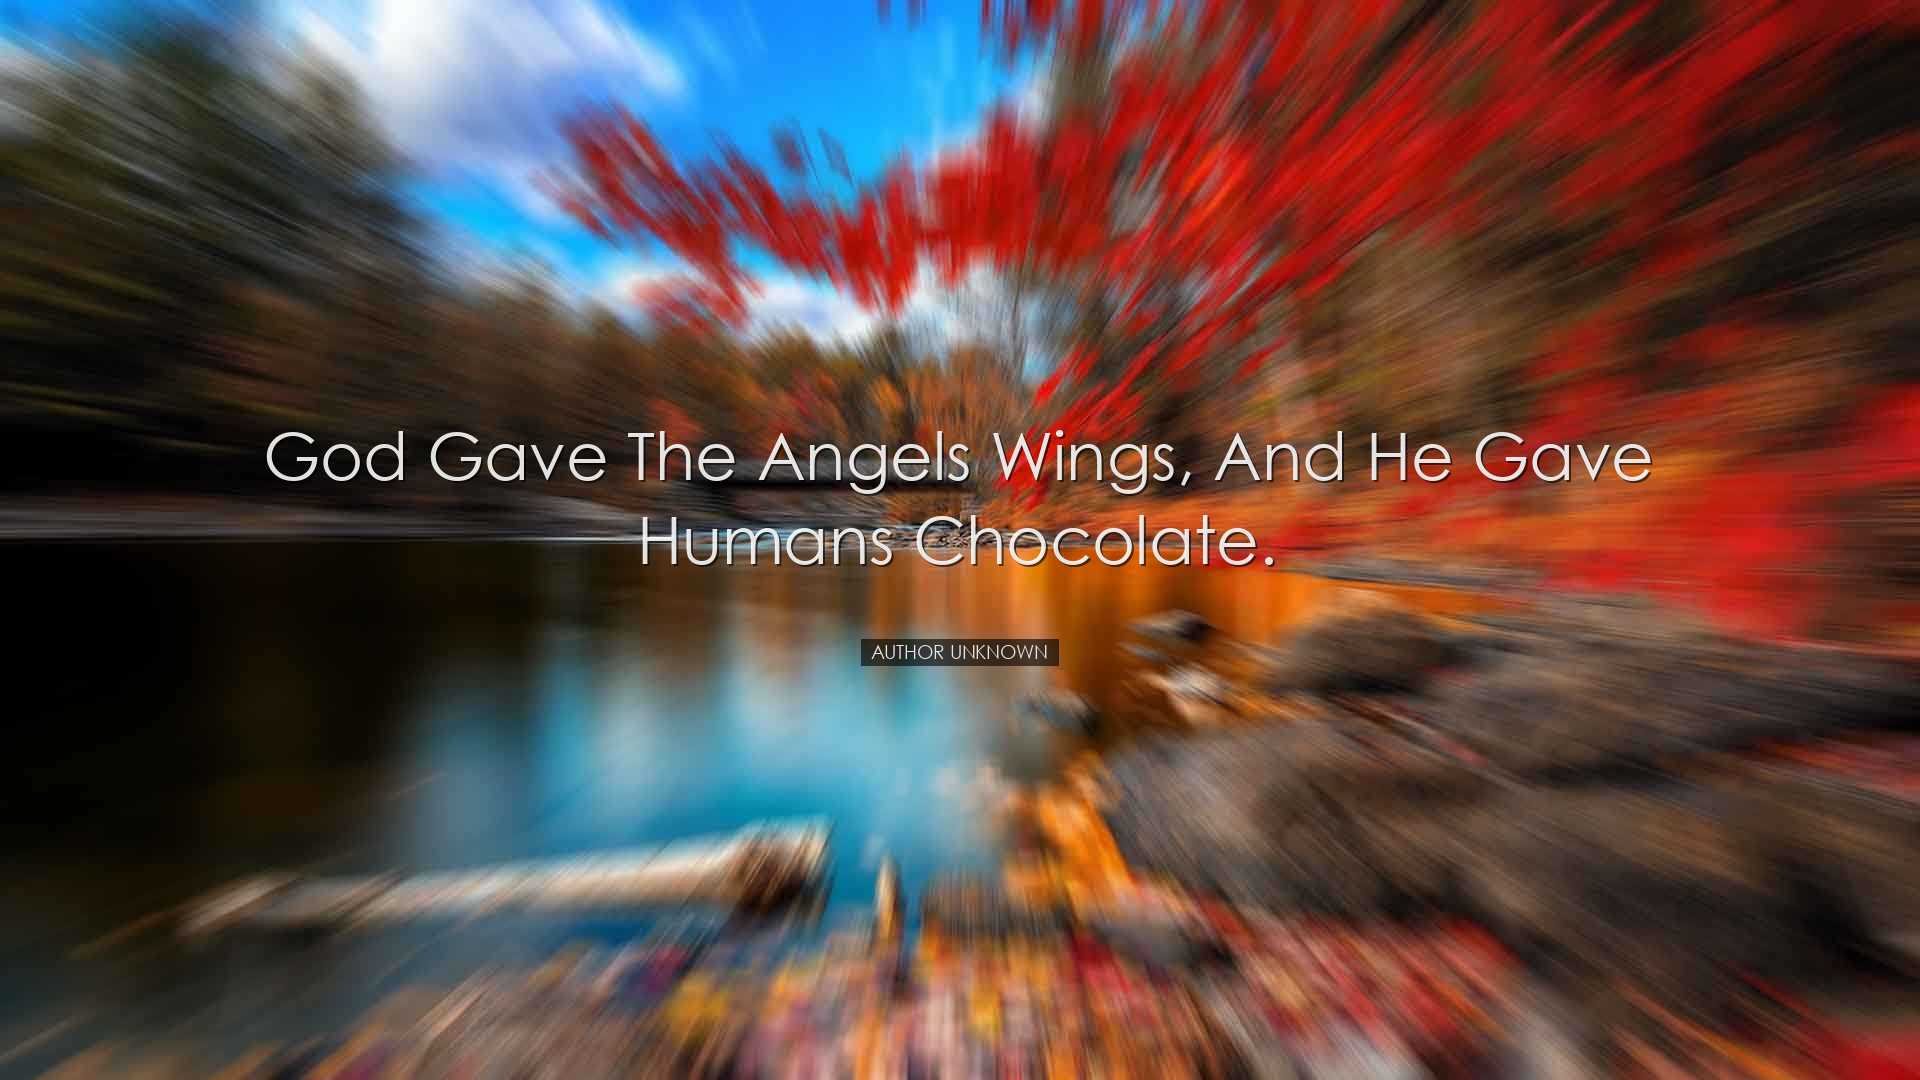 God gave the angels wings, and he gave humans chocolate. - Author